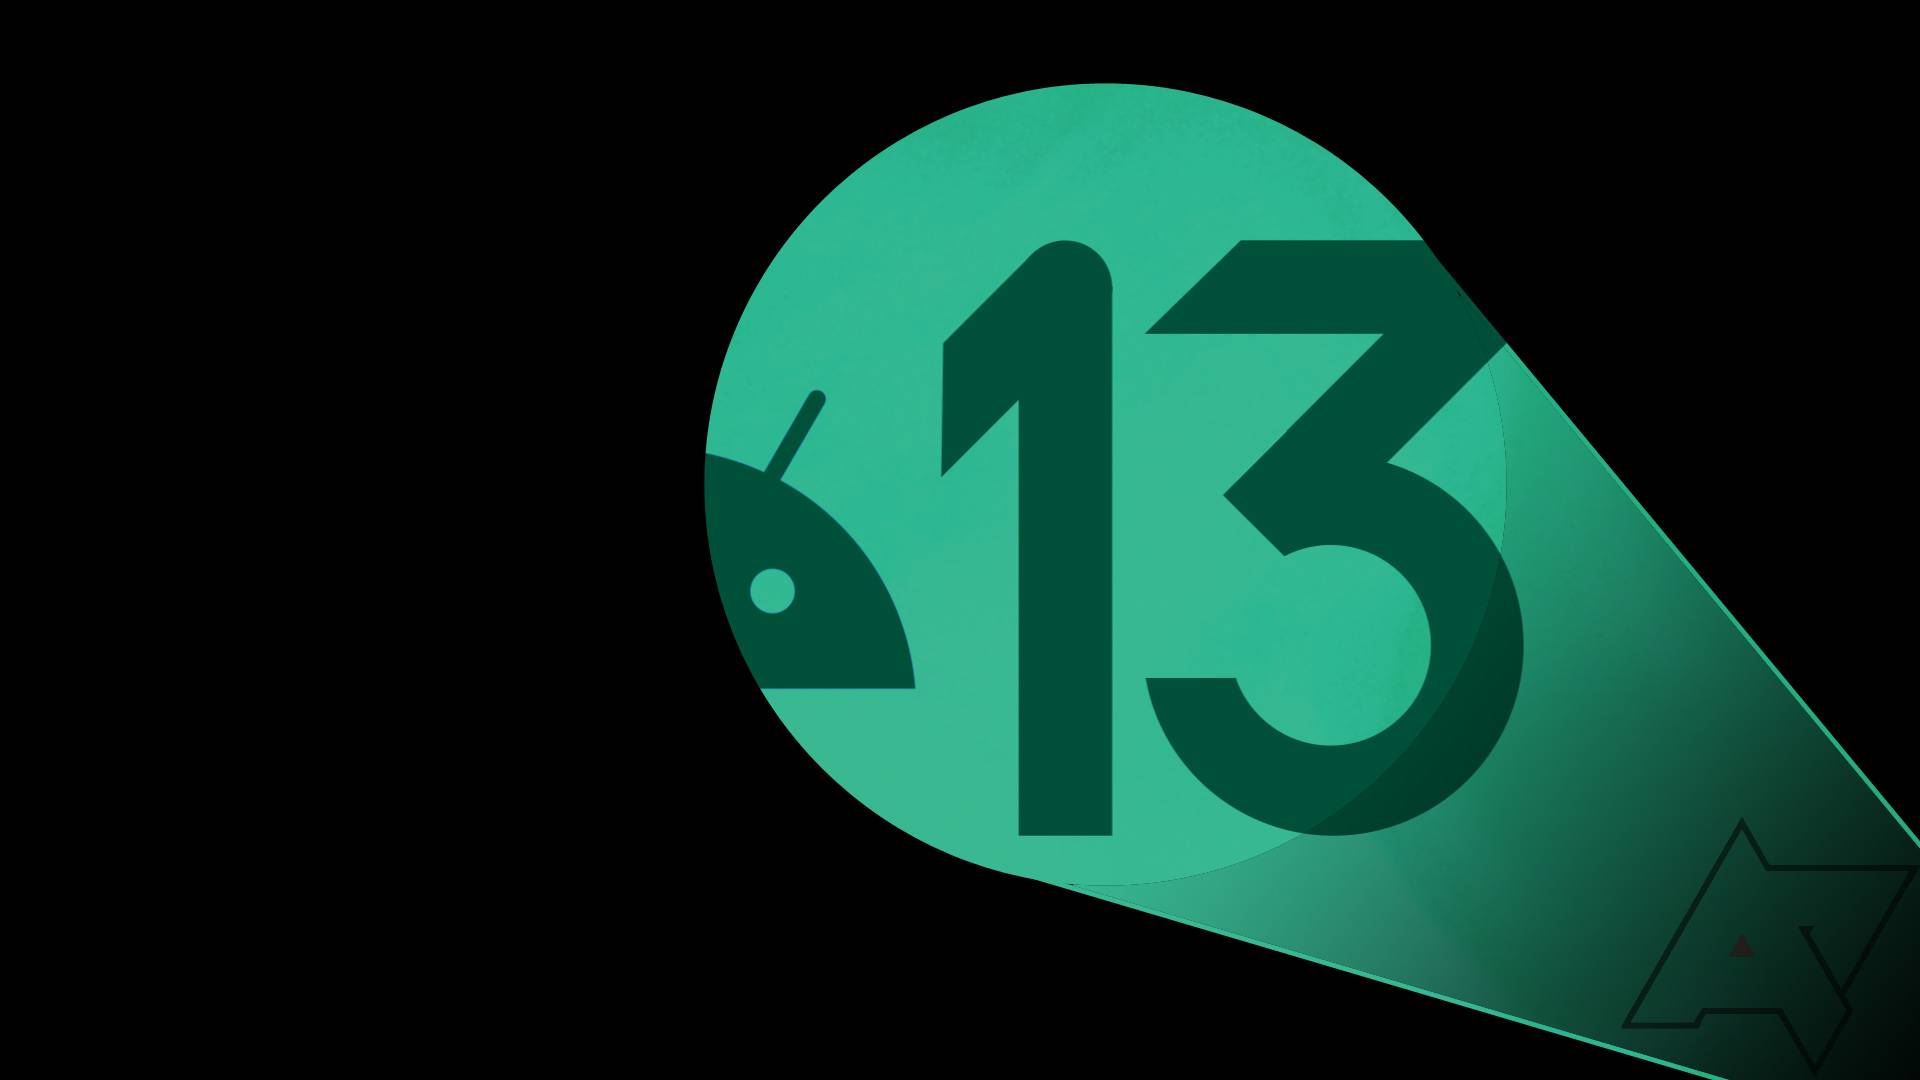 Android 13's prepping a new option for apps trying to keep it on the down-low